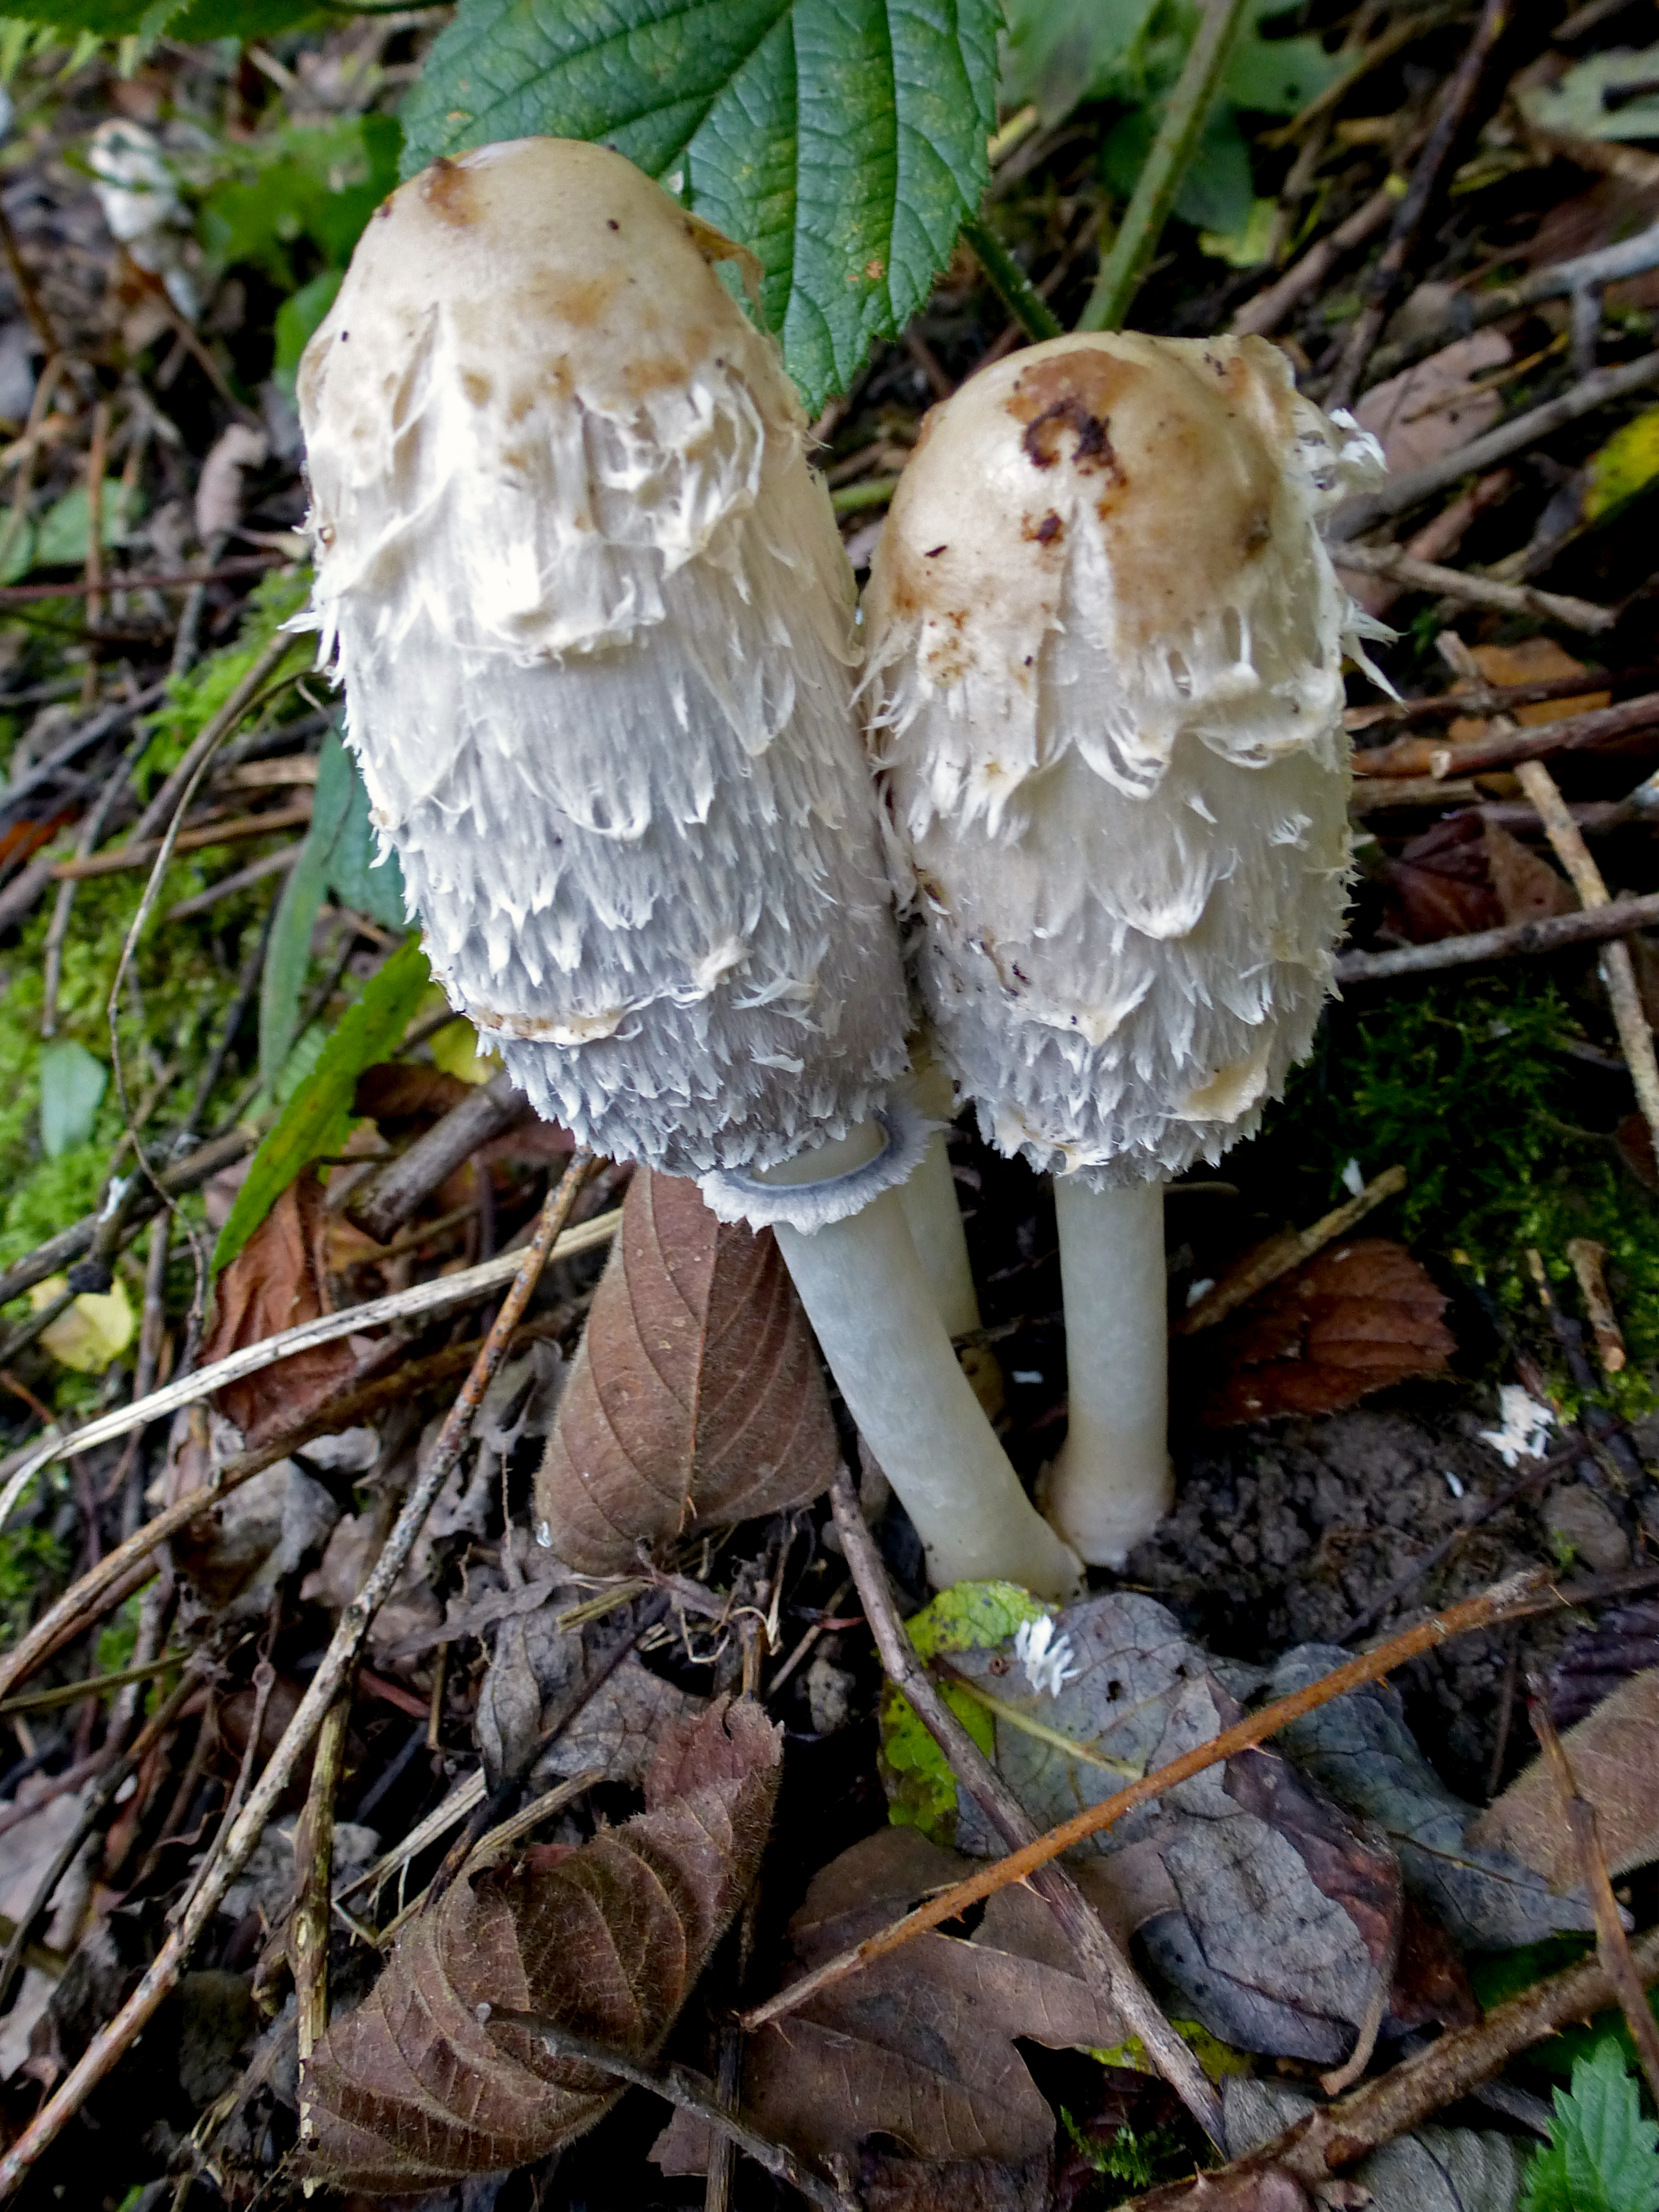 Shaggy Inkcaps, Cromwell Bottom, 18th October 2022